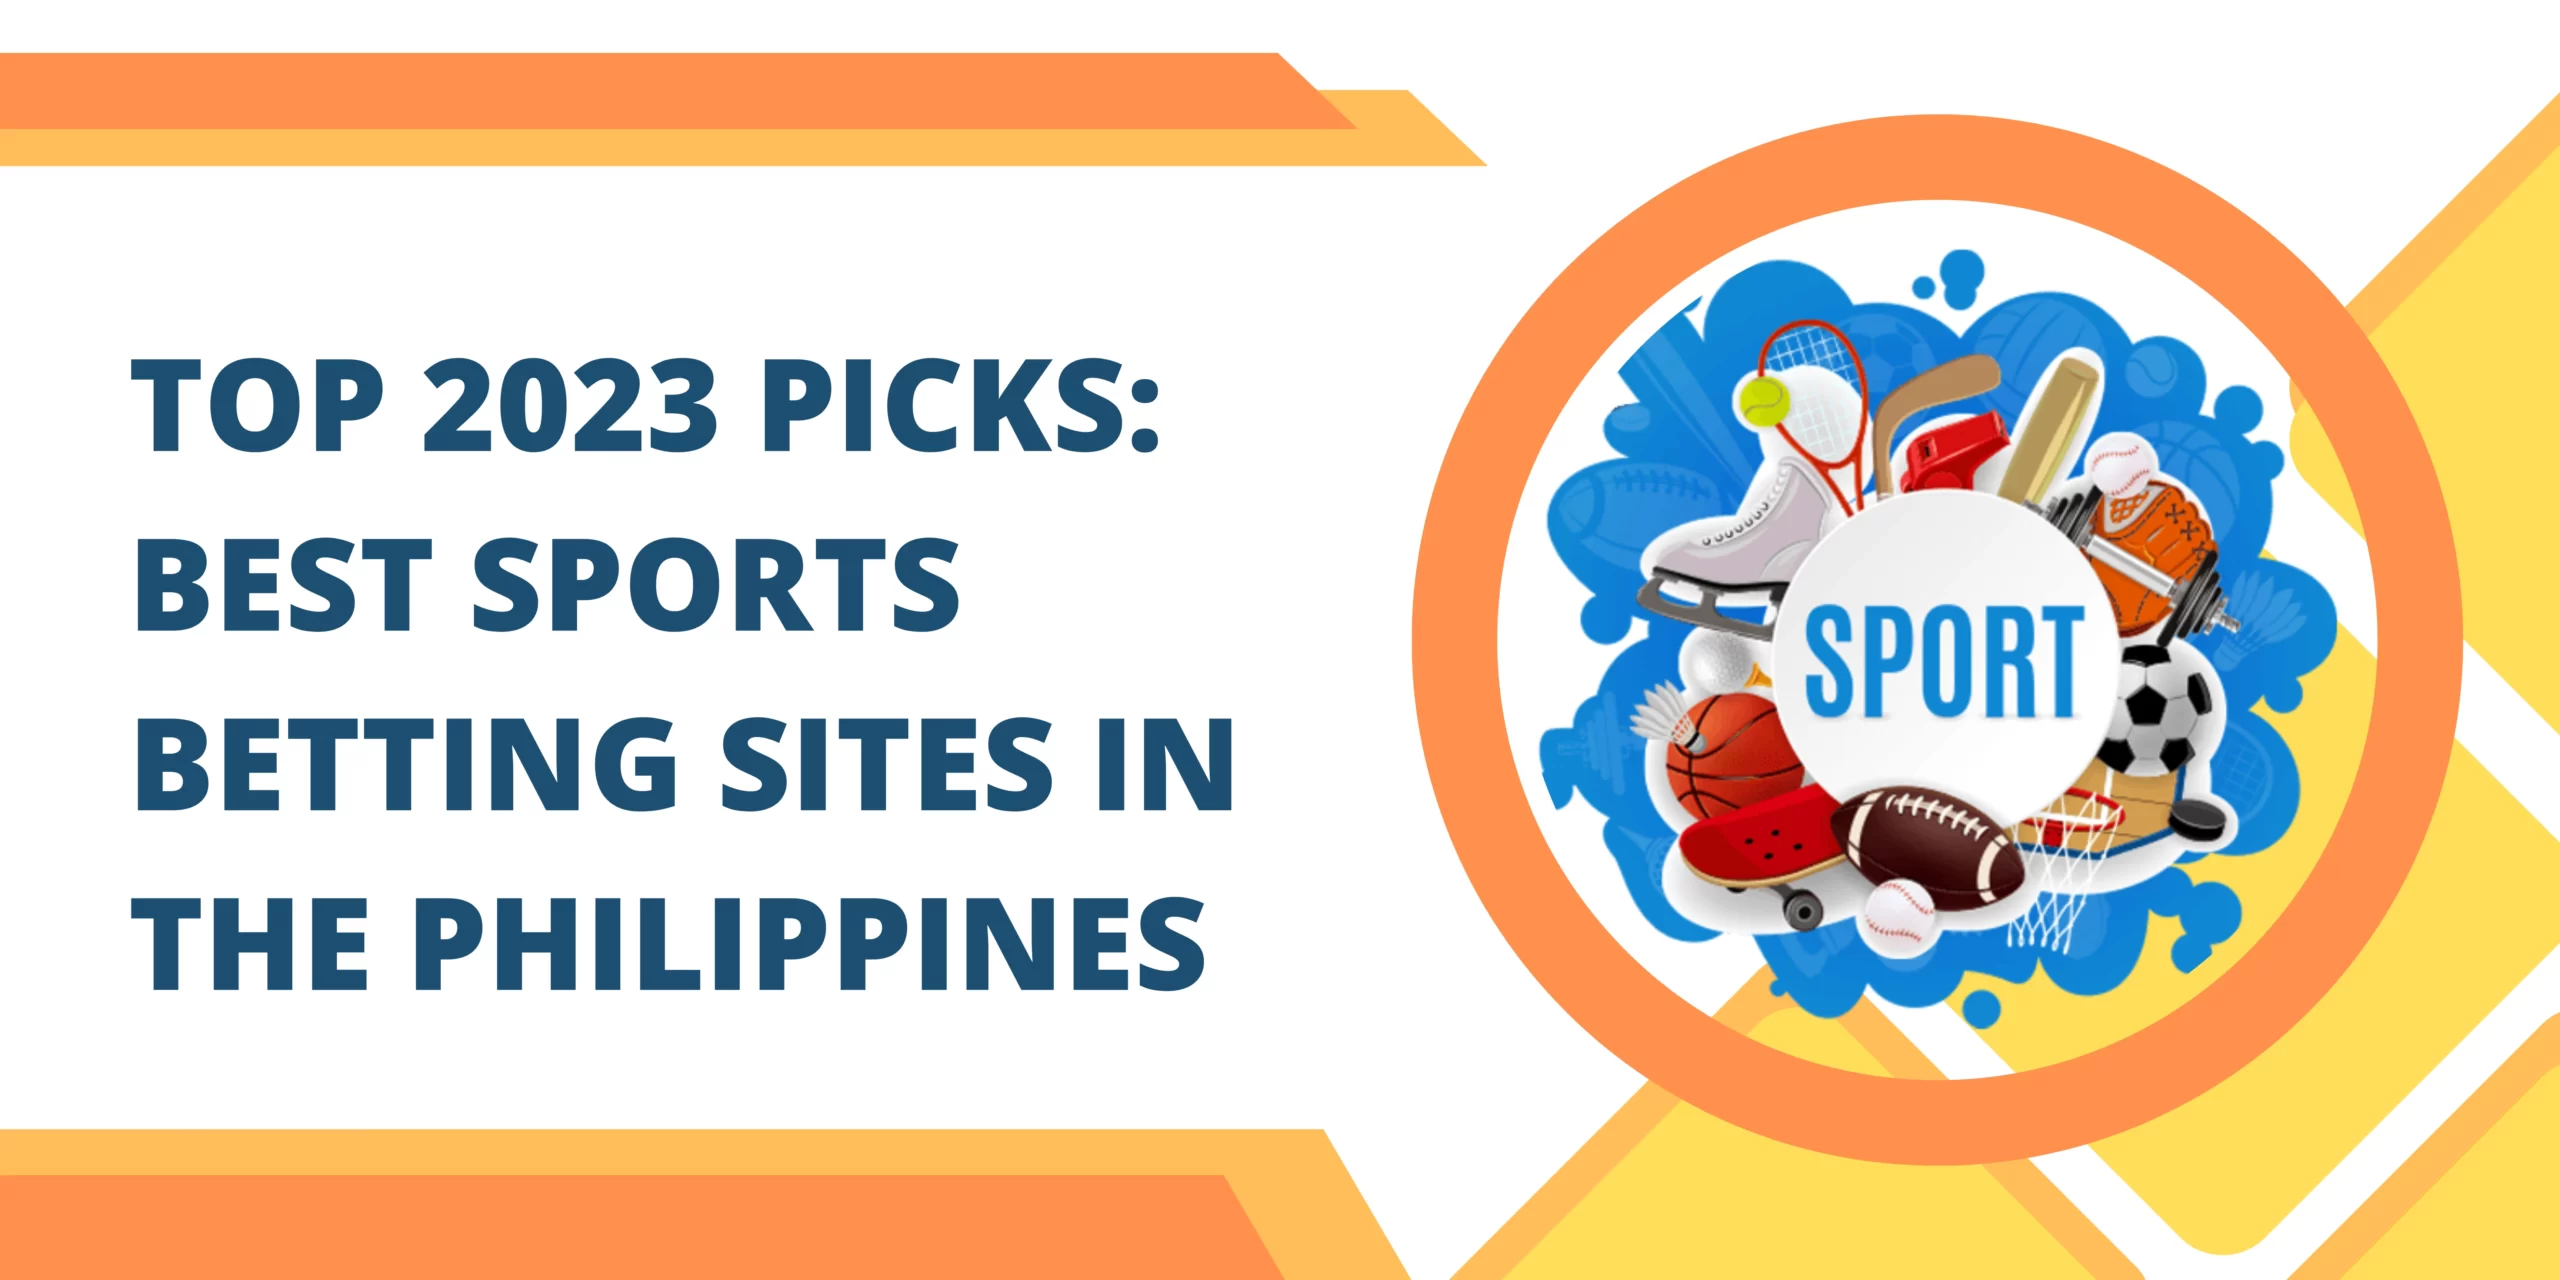 Top 2023 Picks Best Sports Betting Sites in the Philippines